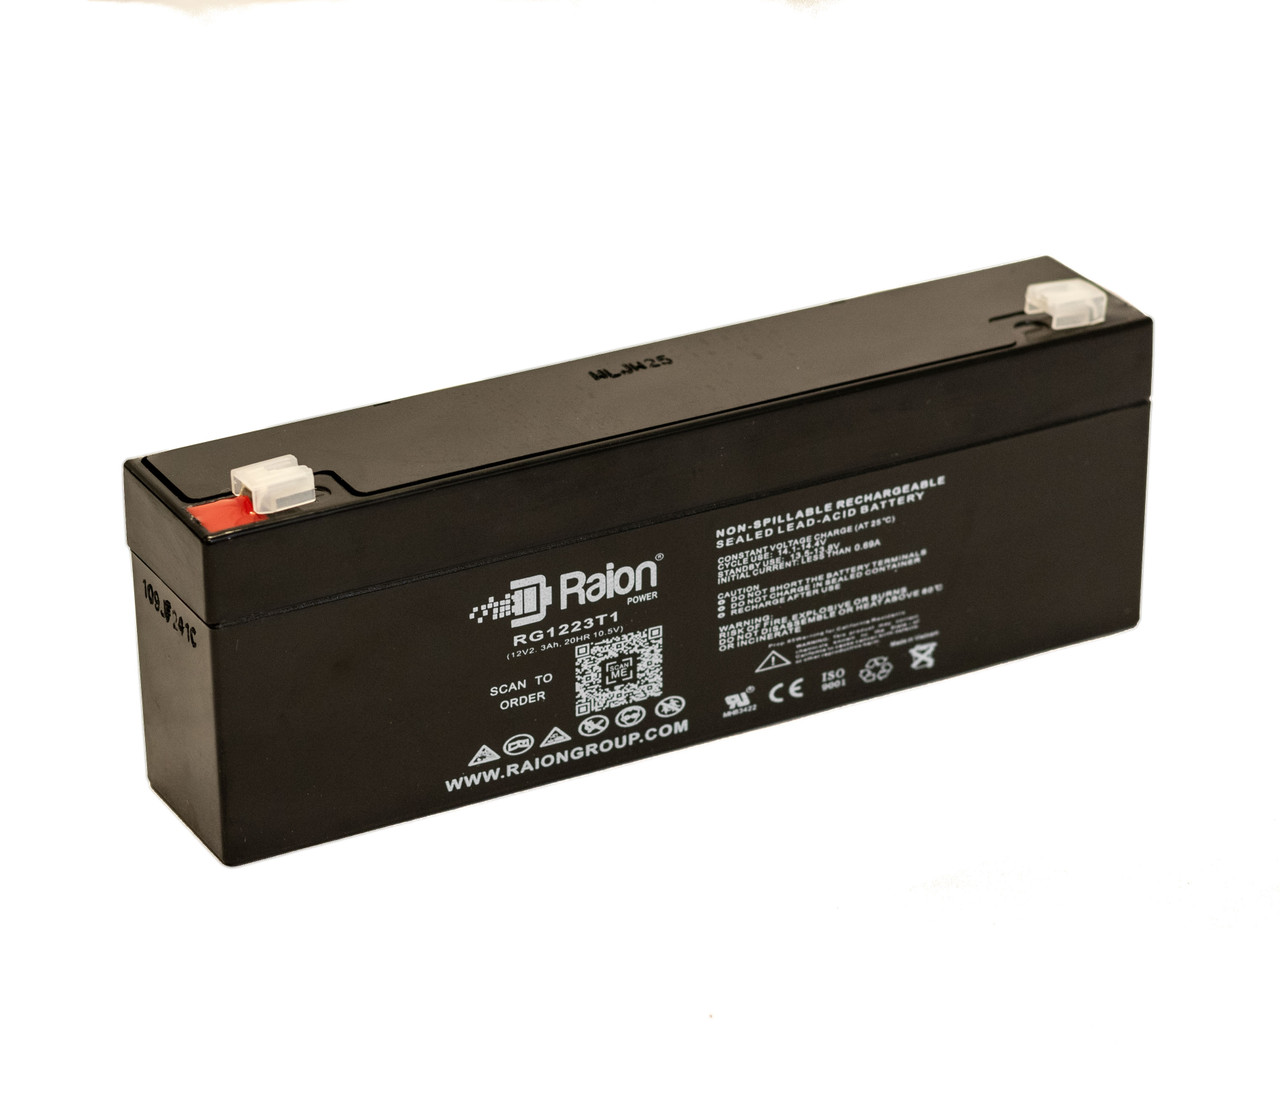 Raion Power RG1223T1 Replacement Battery for Welch Allyn 53013-0000